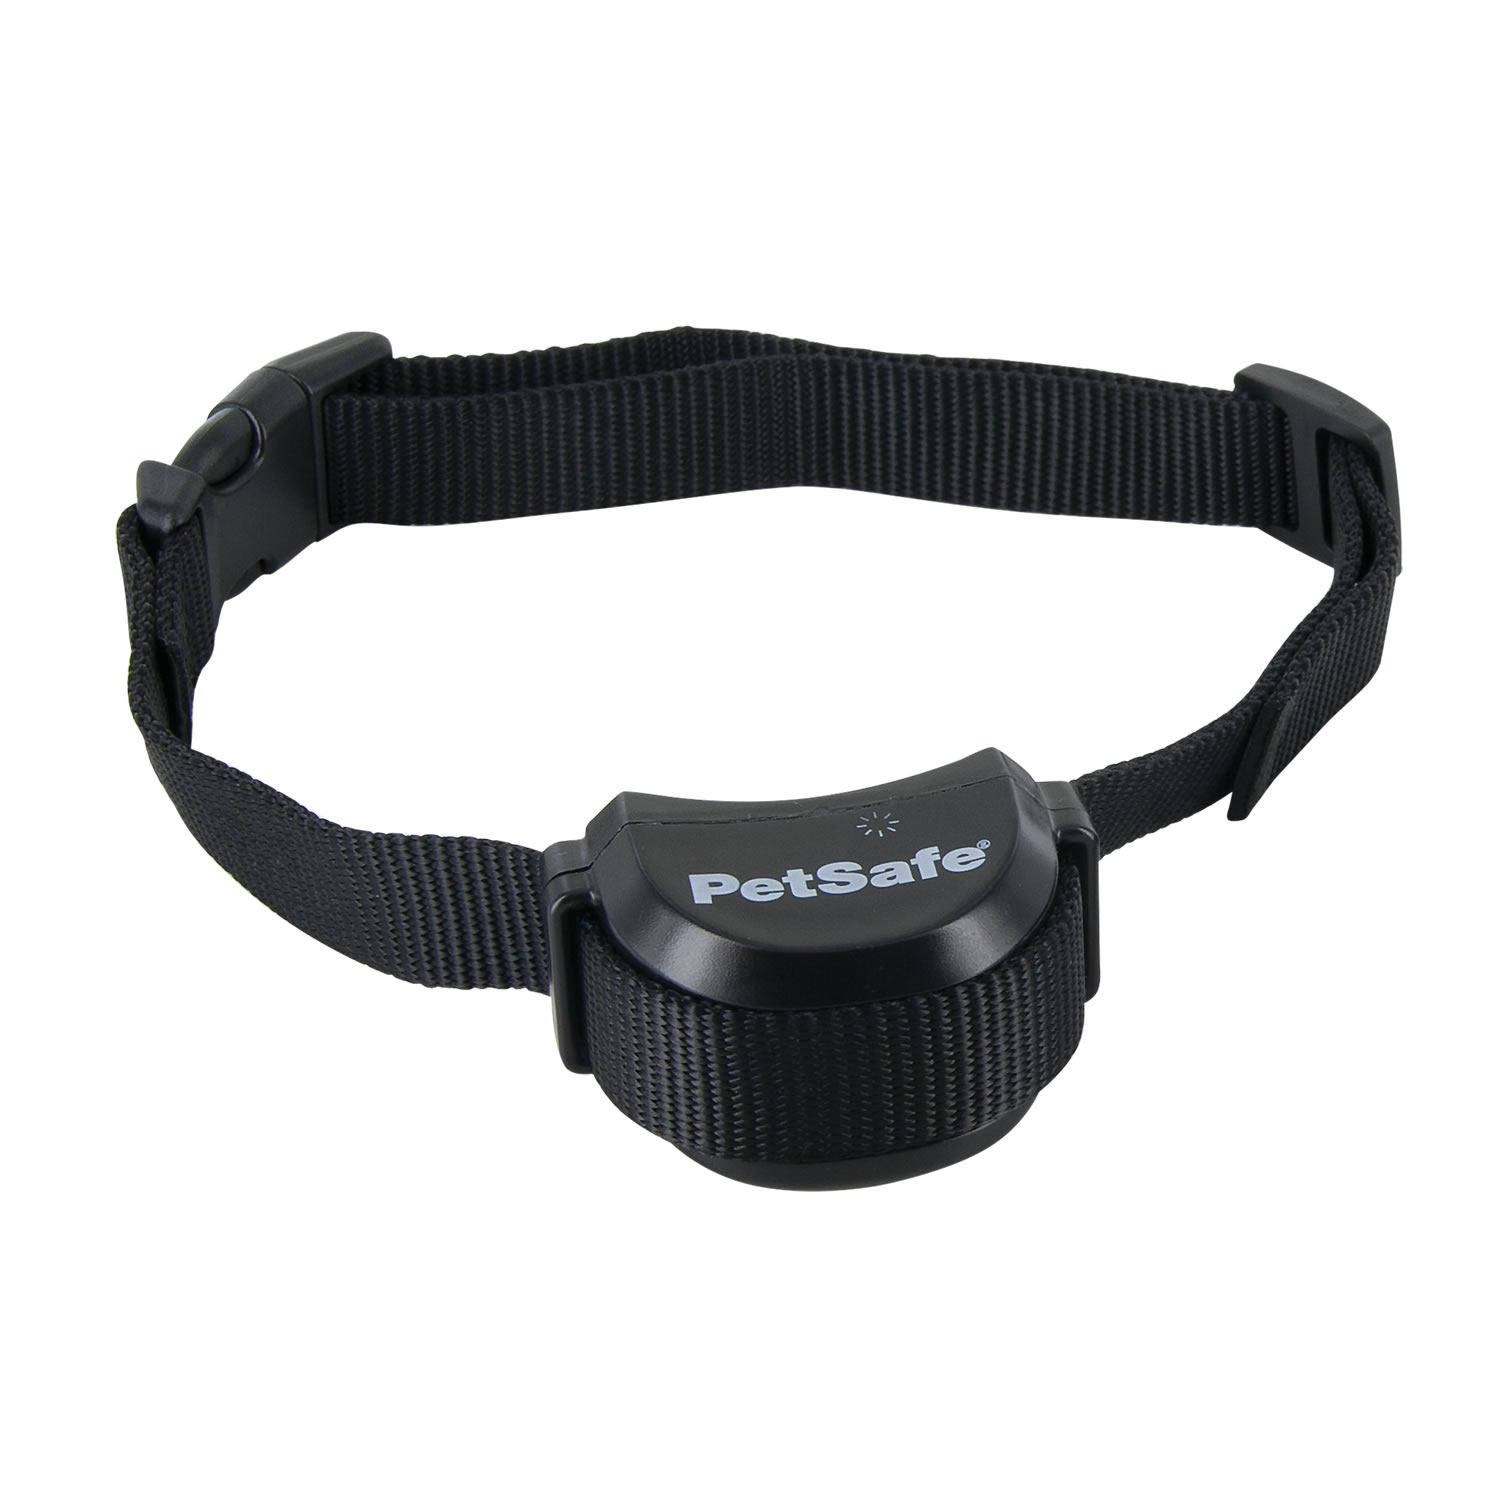 PETSAFE STAY & PLAY WIRELESS FENCE RECEIVER COLLAR